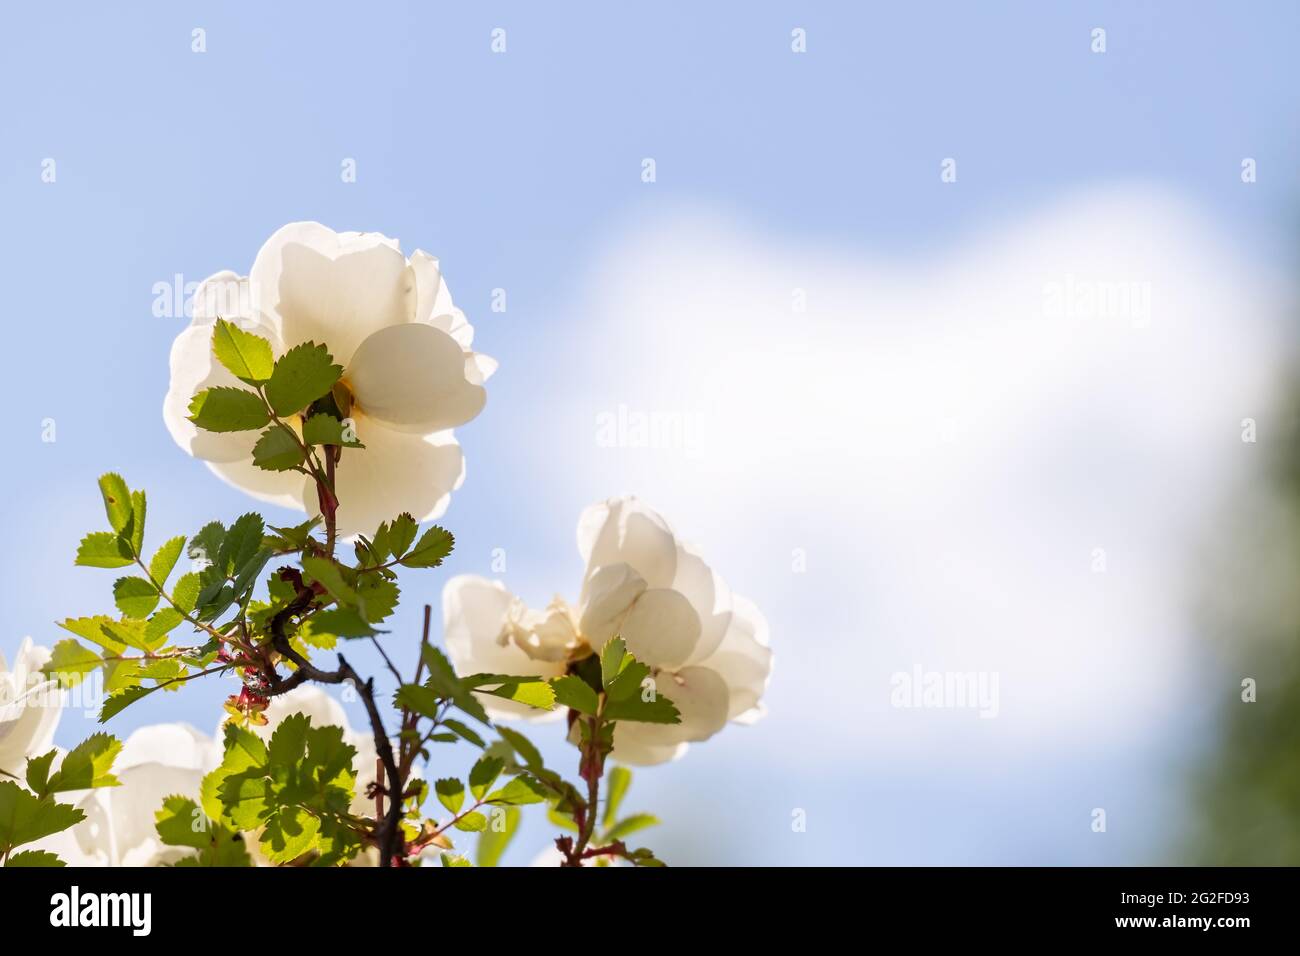 Beautiful, fragrant white rose blossoms against the blue sky and clouds on a hot summer day. Copy space.  Stock Photo